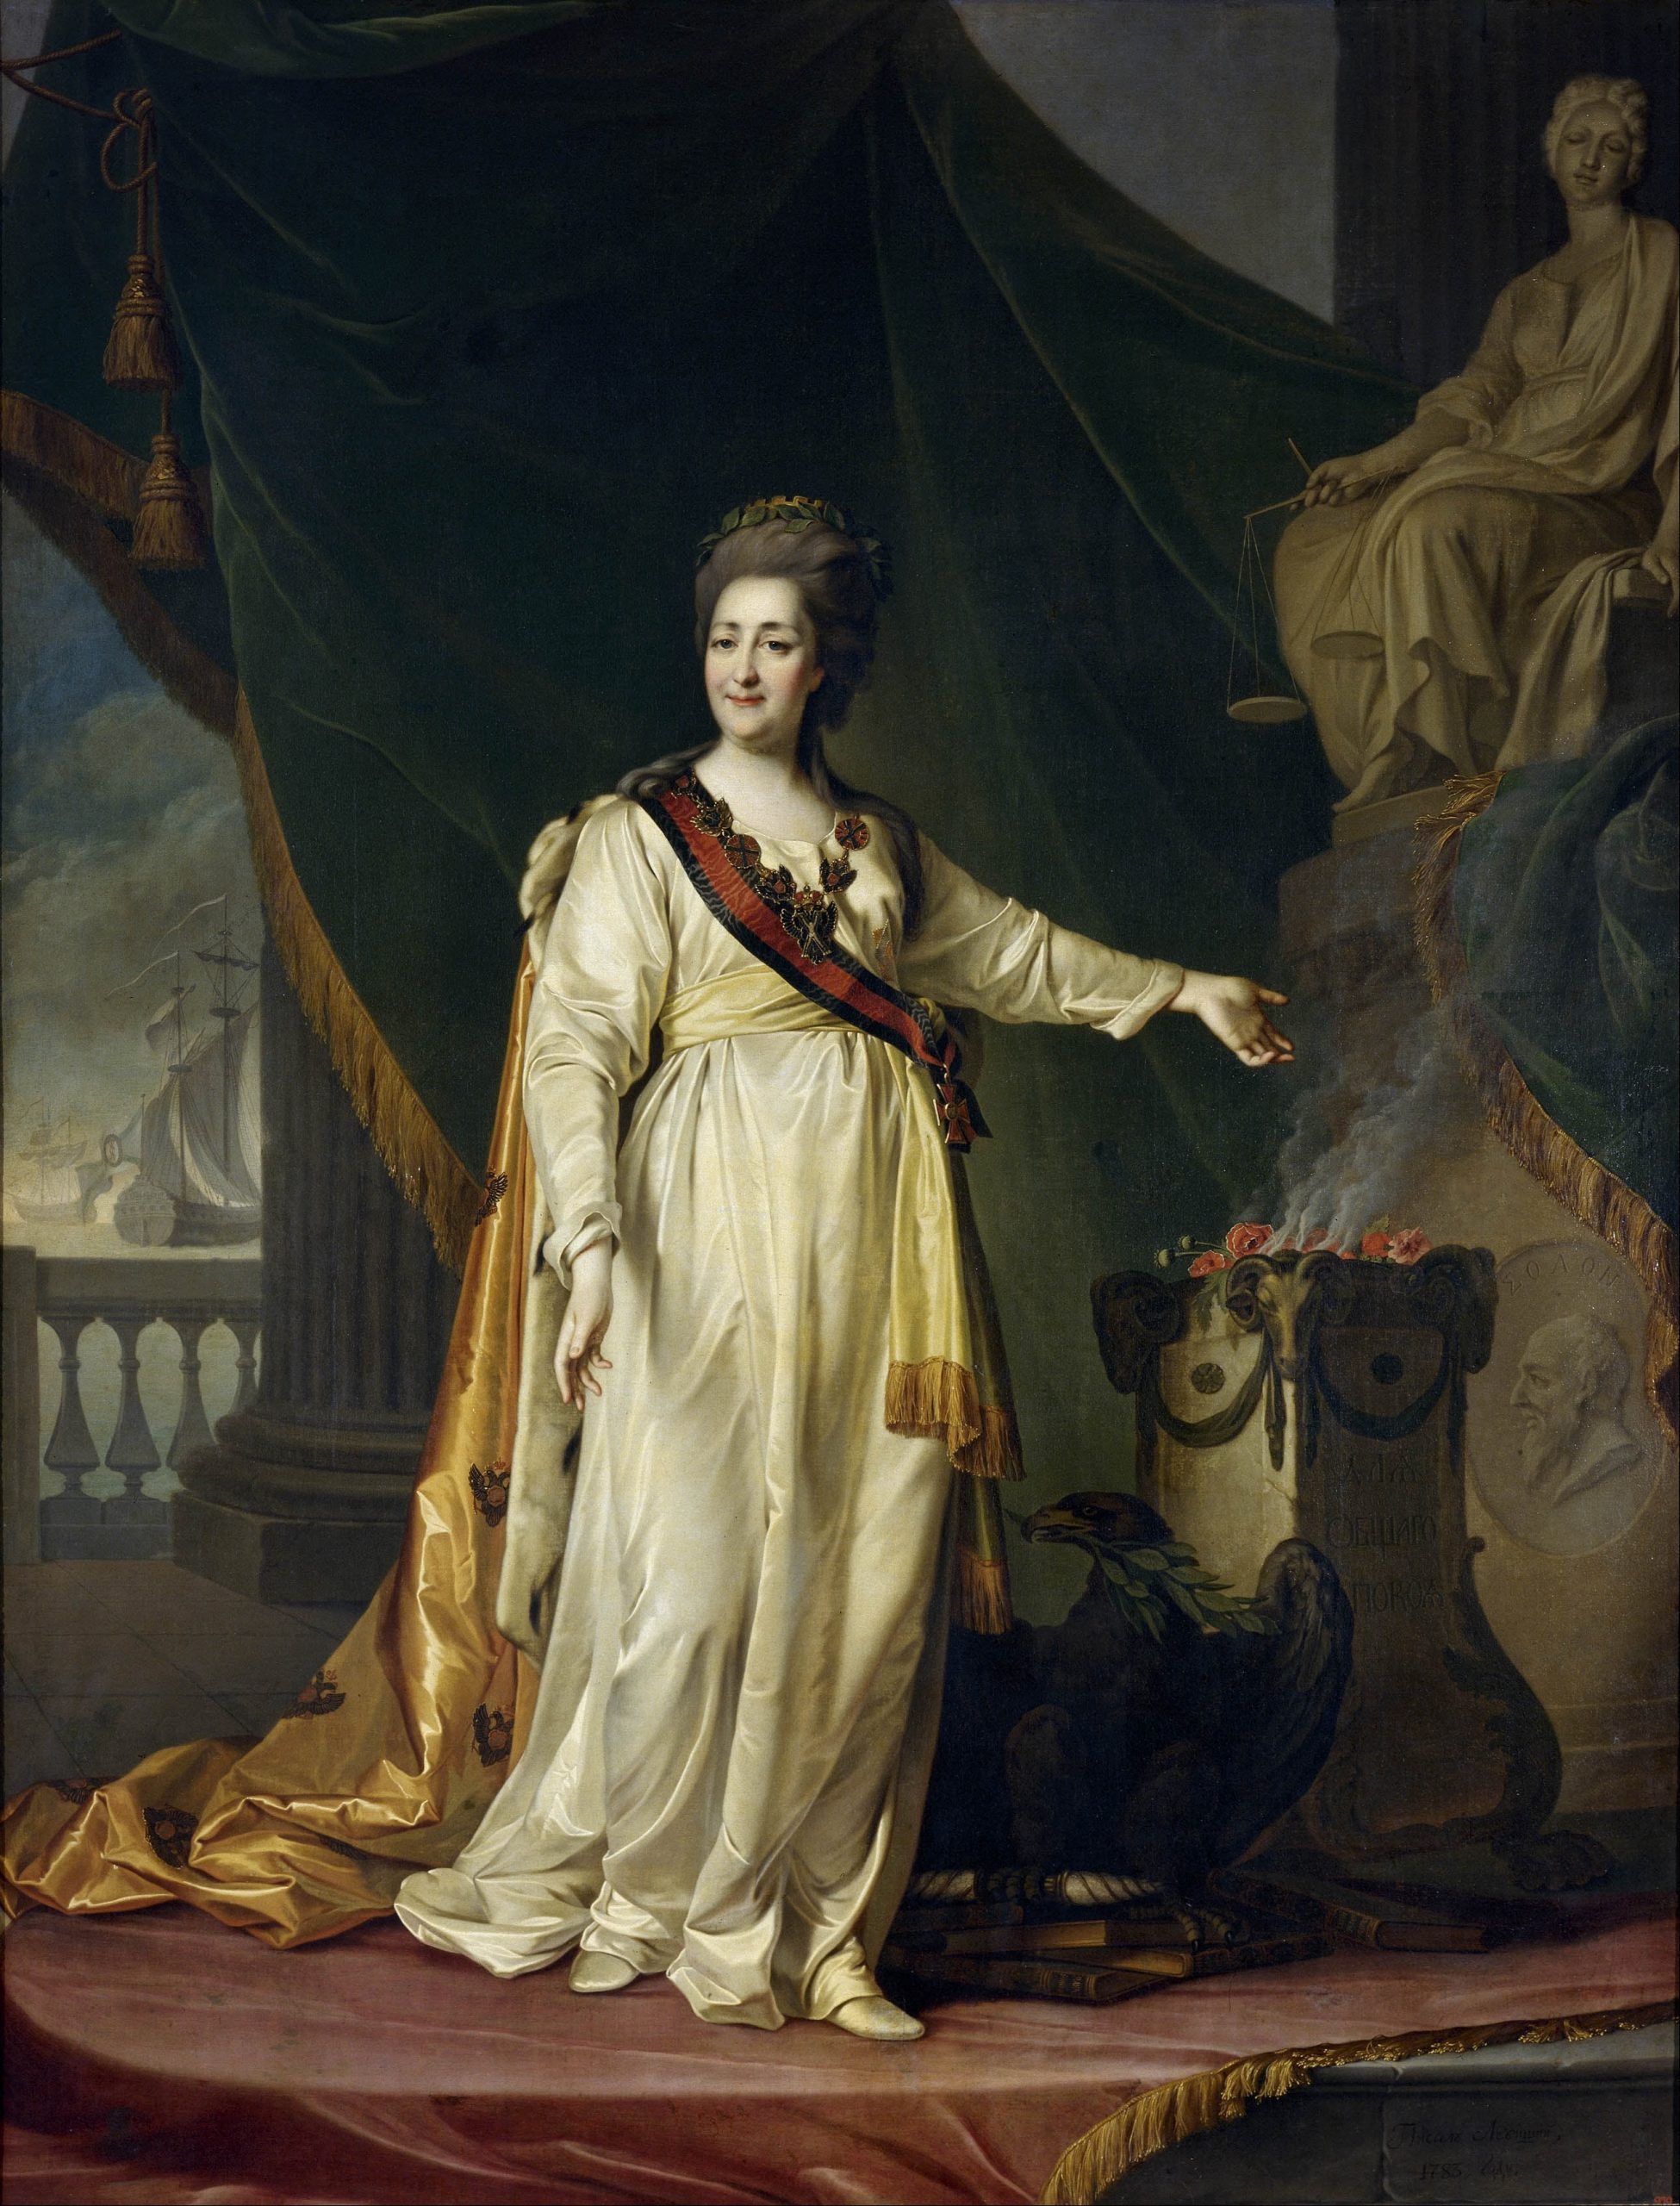 Dmitriy Leviskiy, Portrait of Catherine the Great as a Law-giver in temle of Themis, 1783 The State Russian Museum, St. Petersburg, Russia. Rococo Beauty Guide